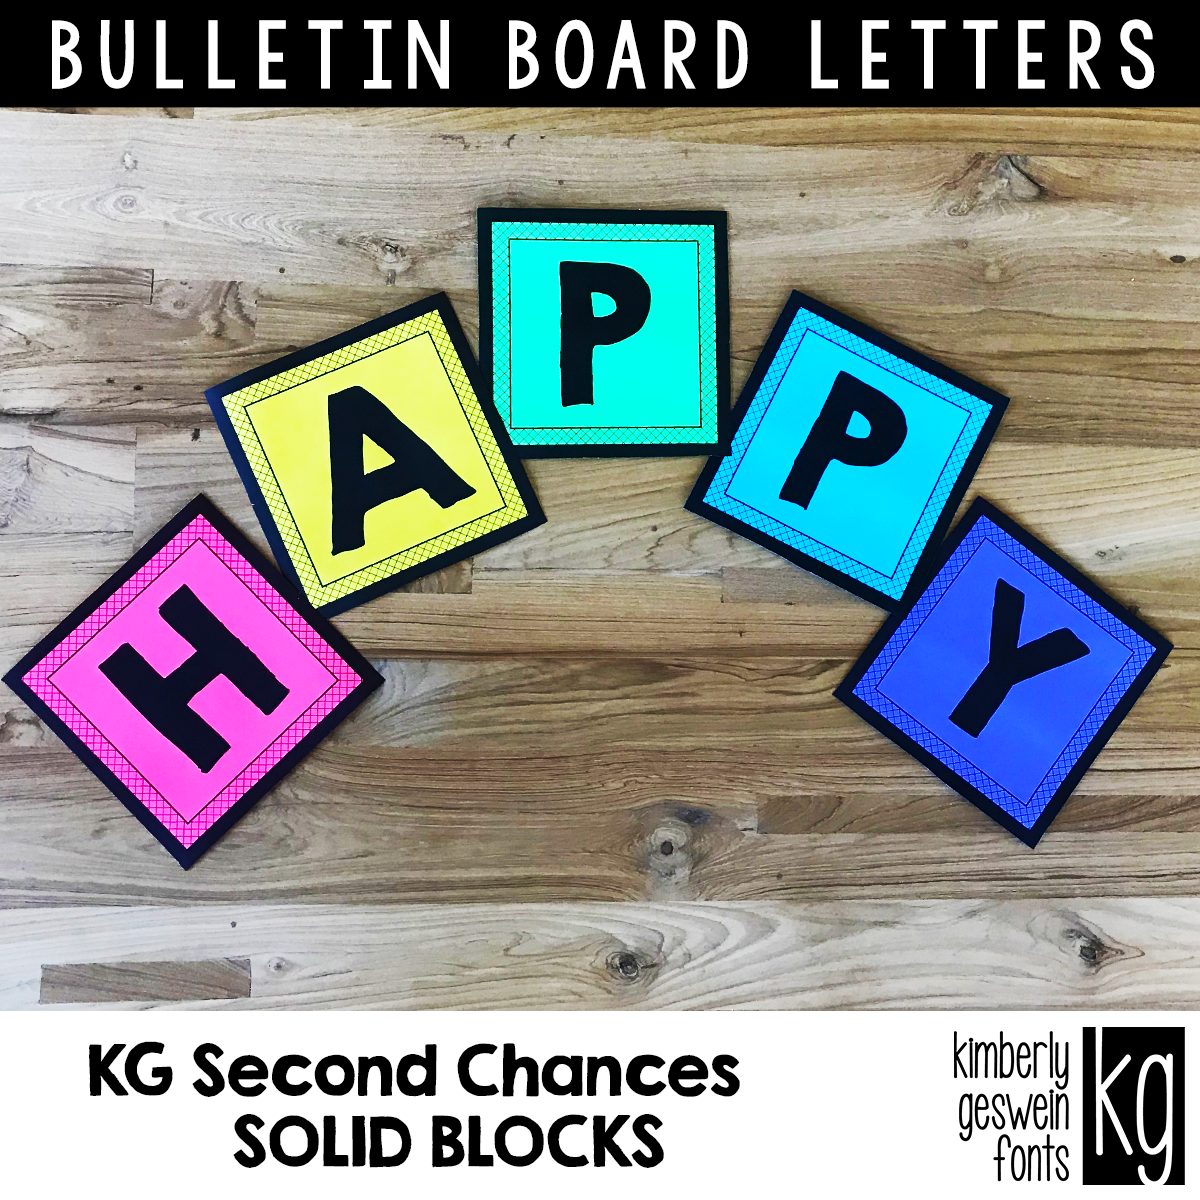 kg-second-chances-solid-blocks-bulletin-board-letters-kimberly